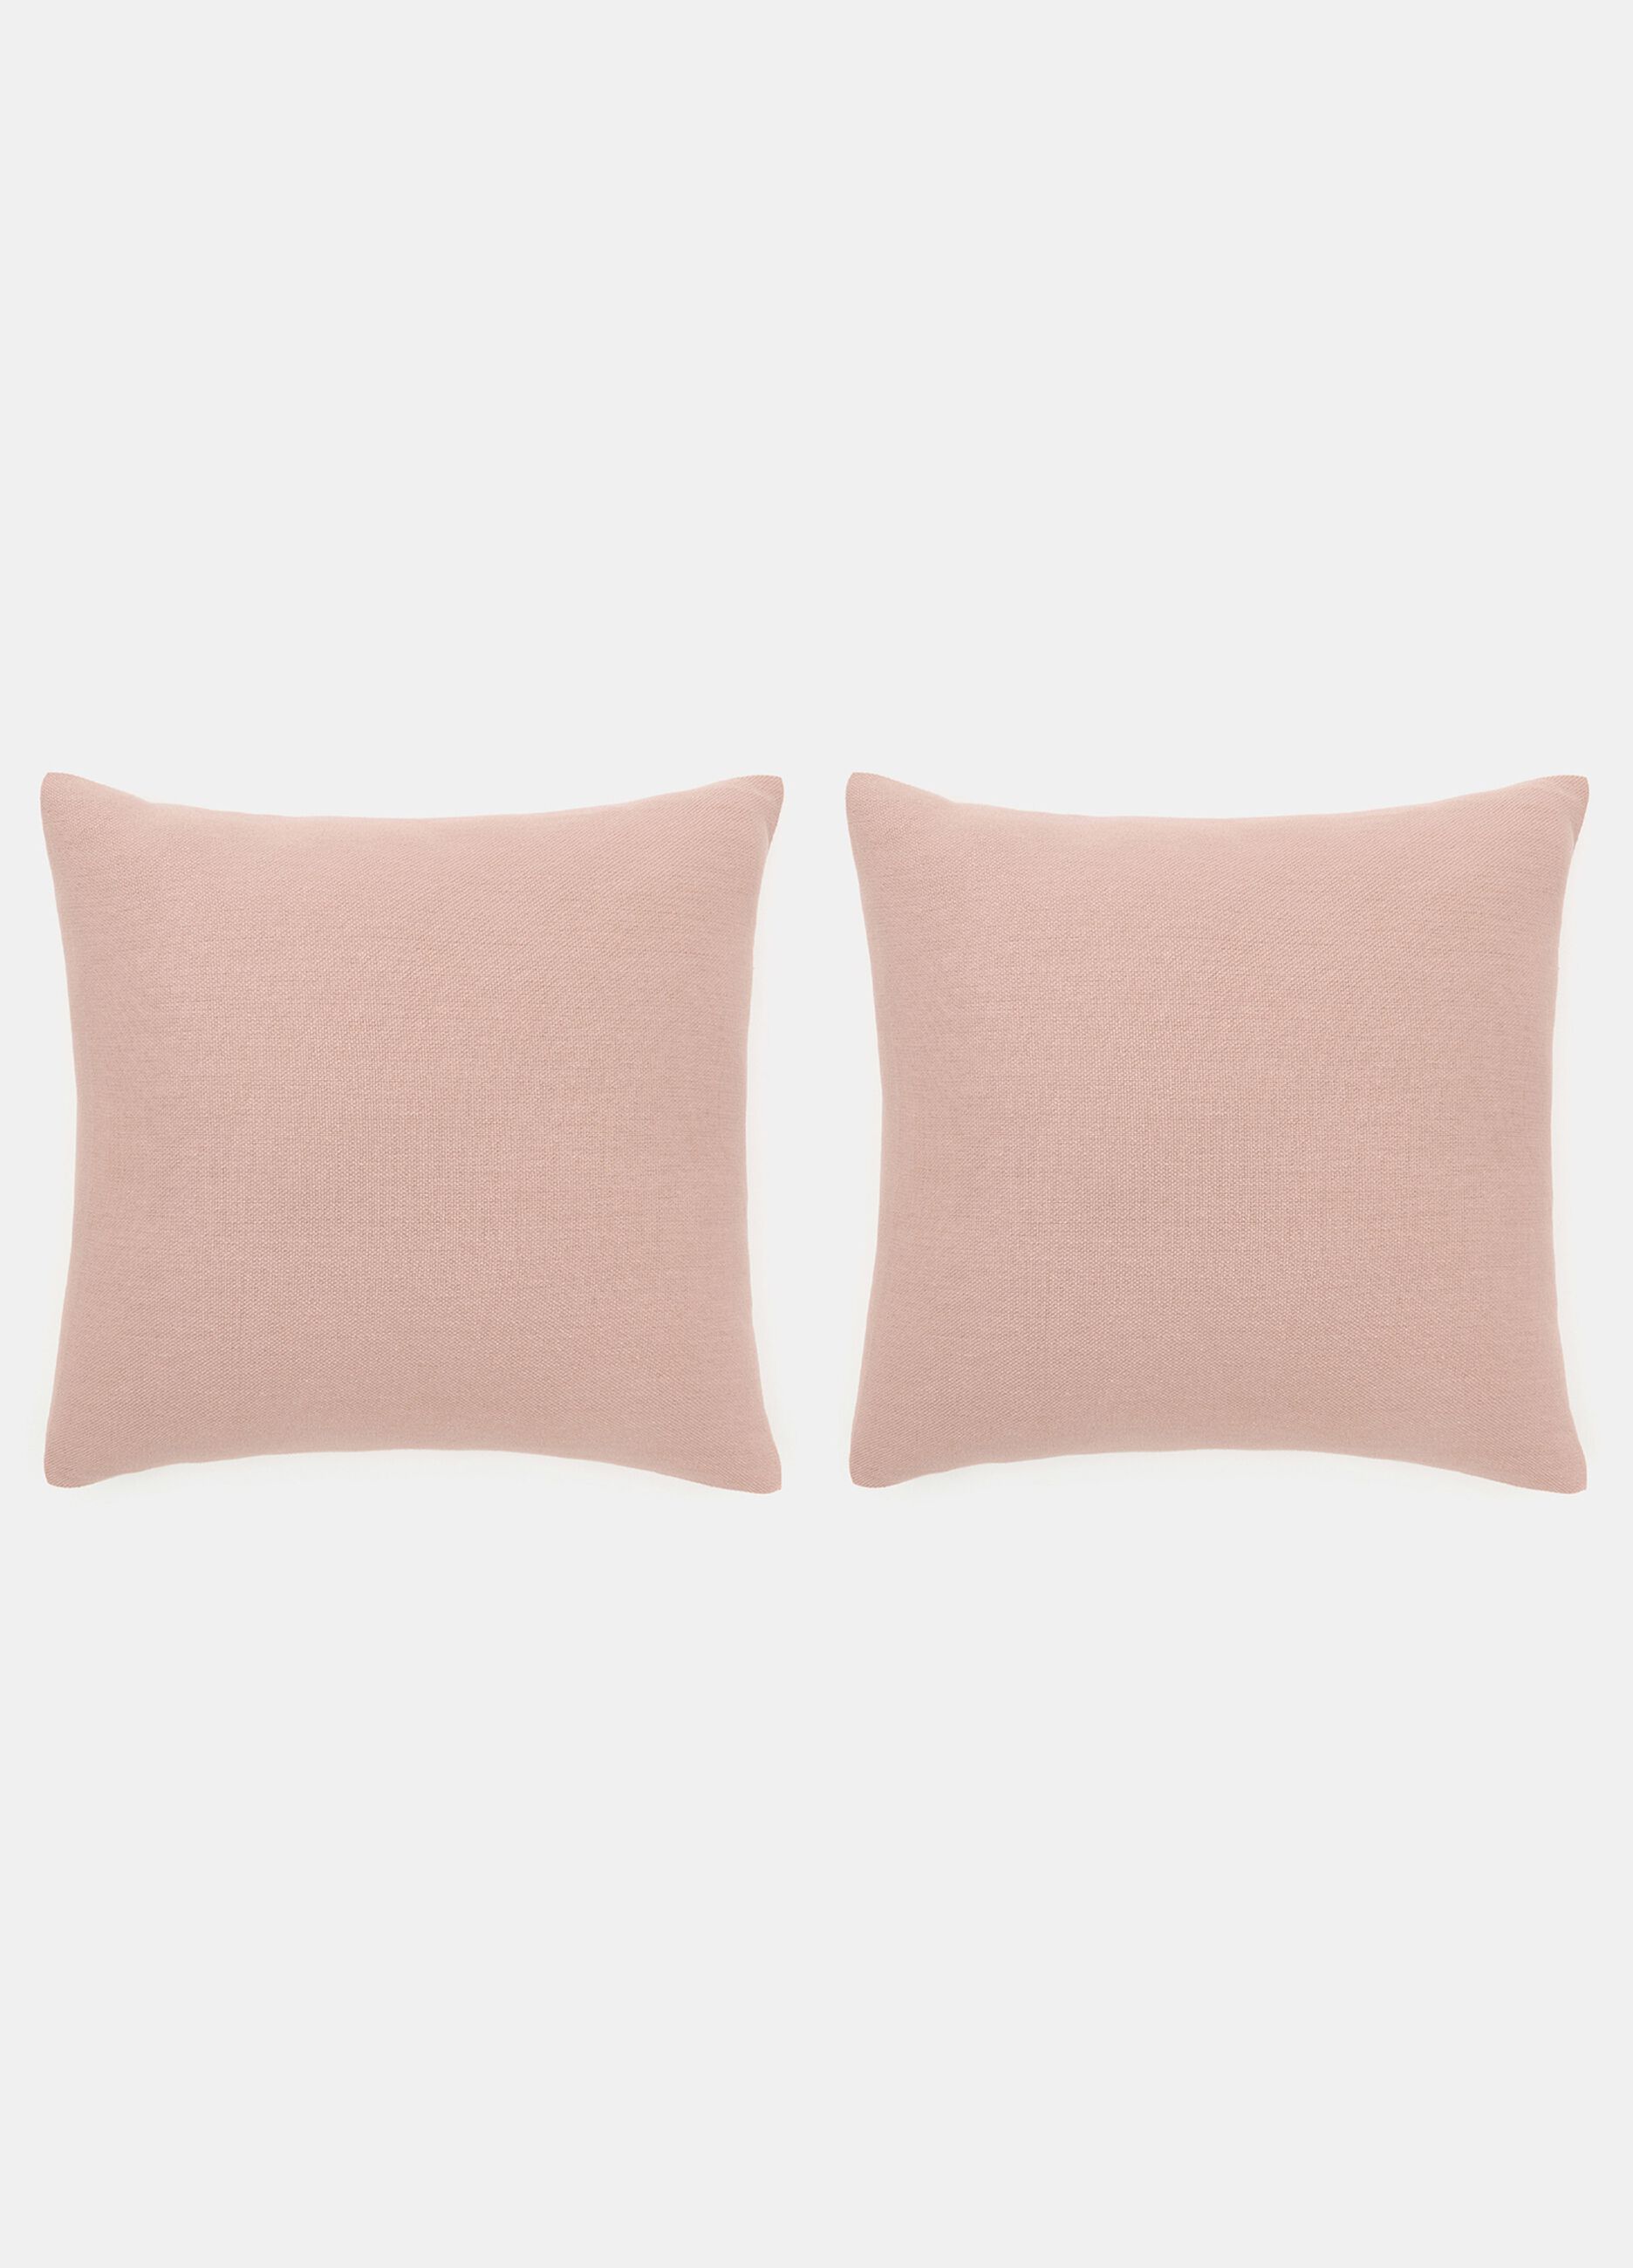 Set of 2 square cushion covers